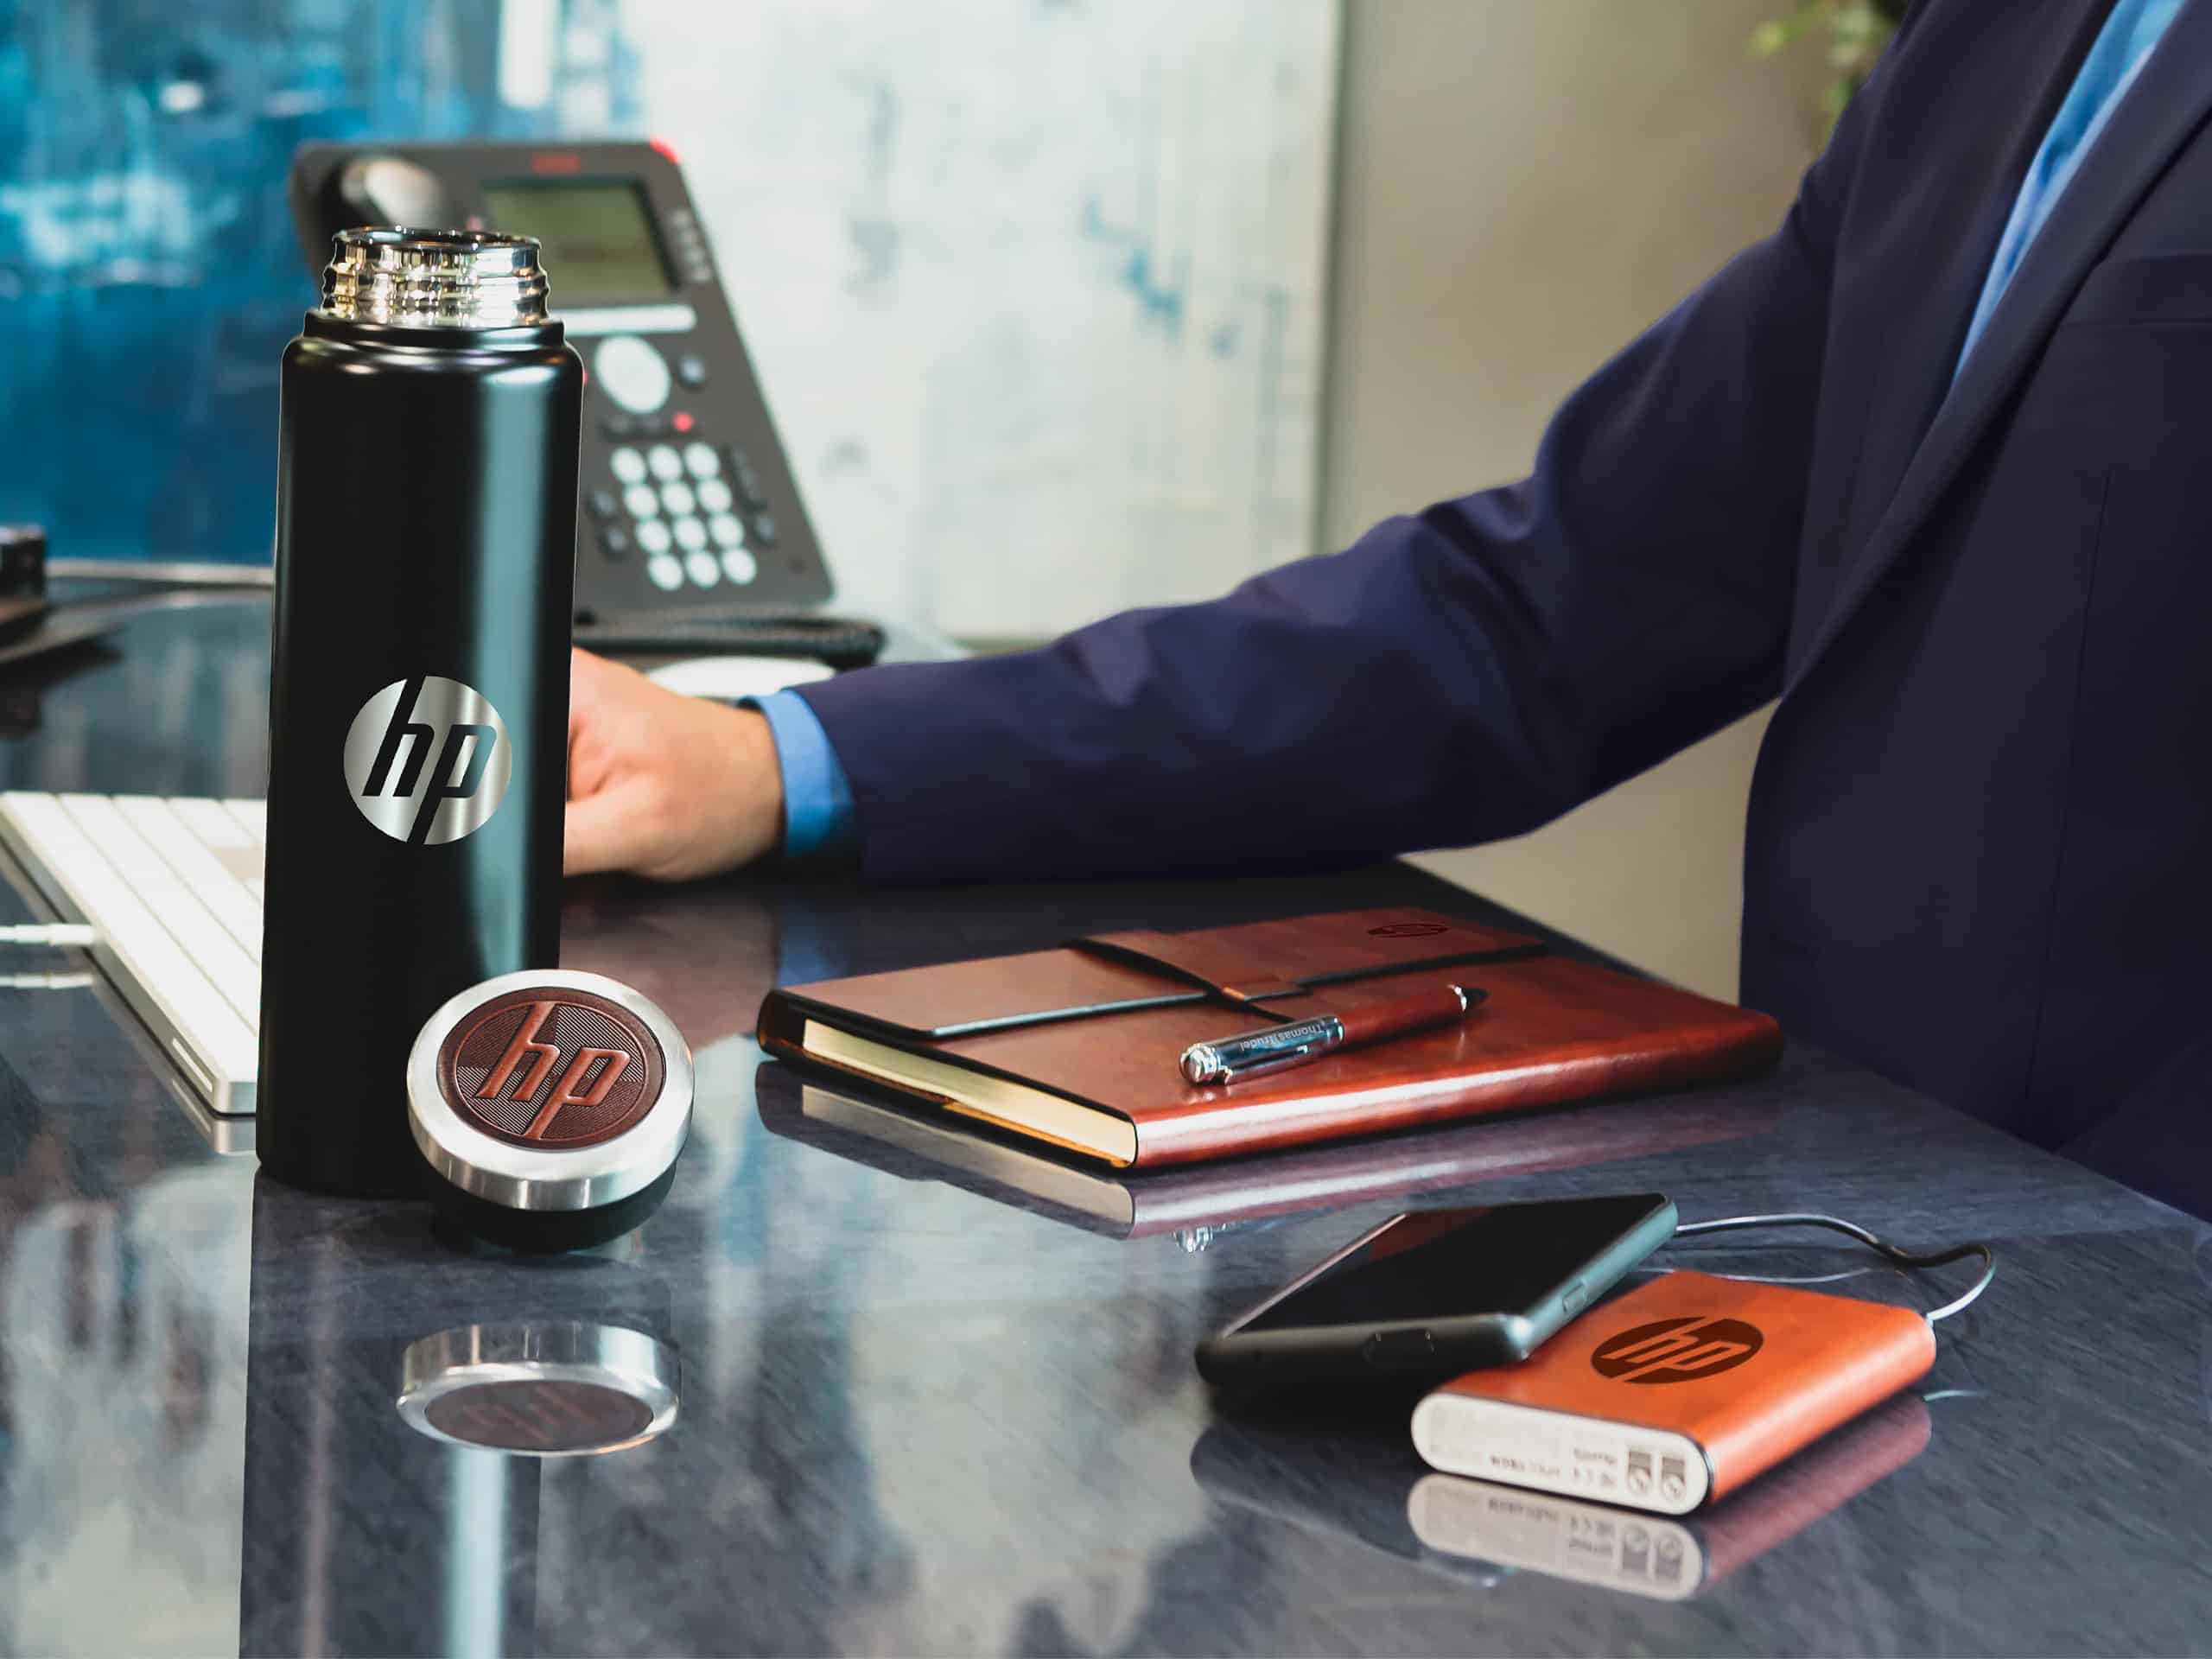 A man in a suit is sitting at a desk with a hp branded water bottle and a power bank.